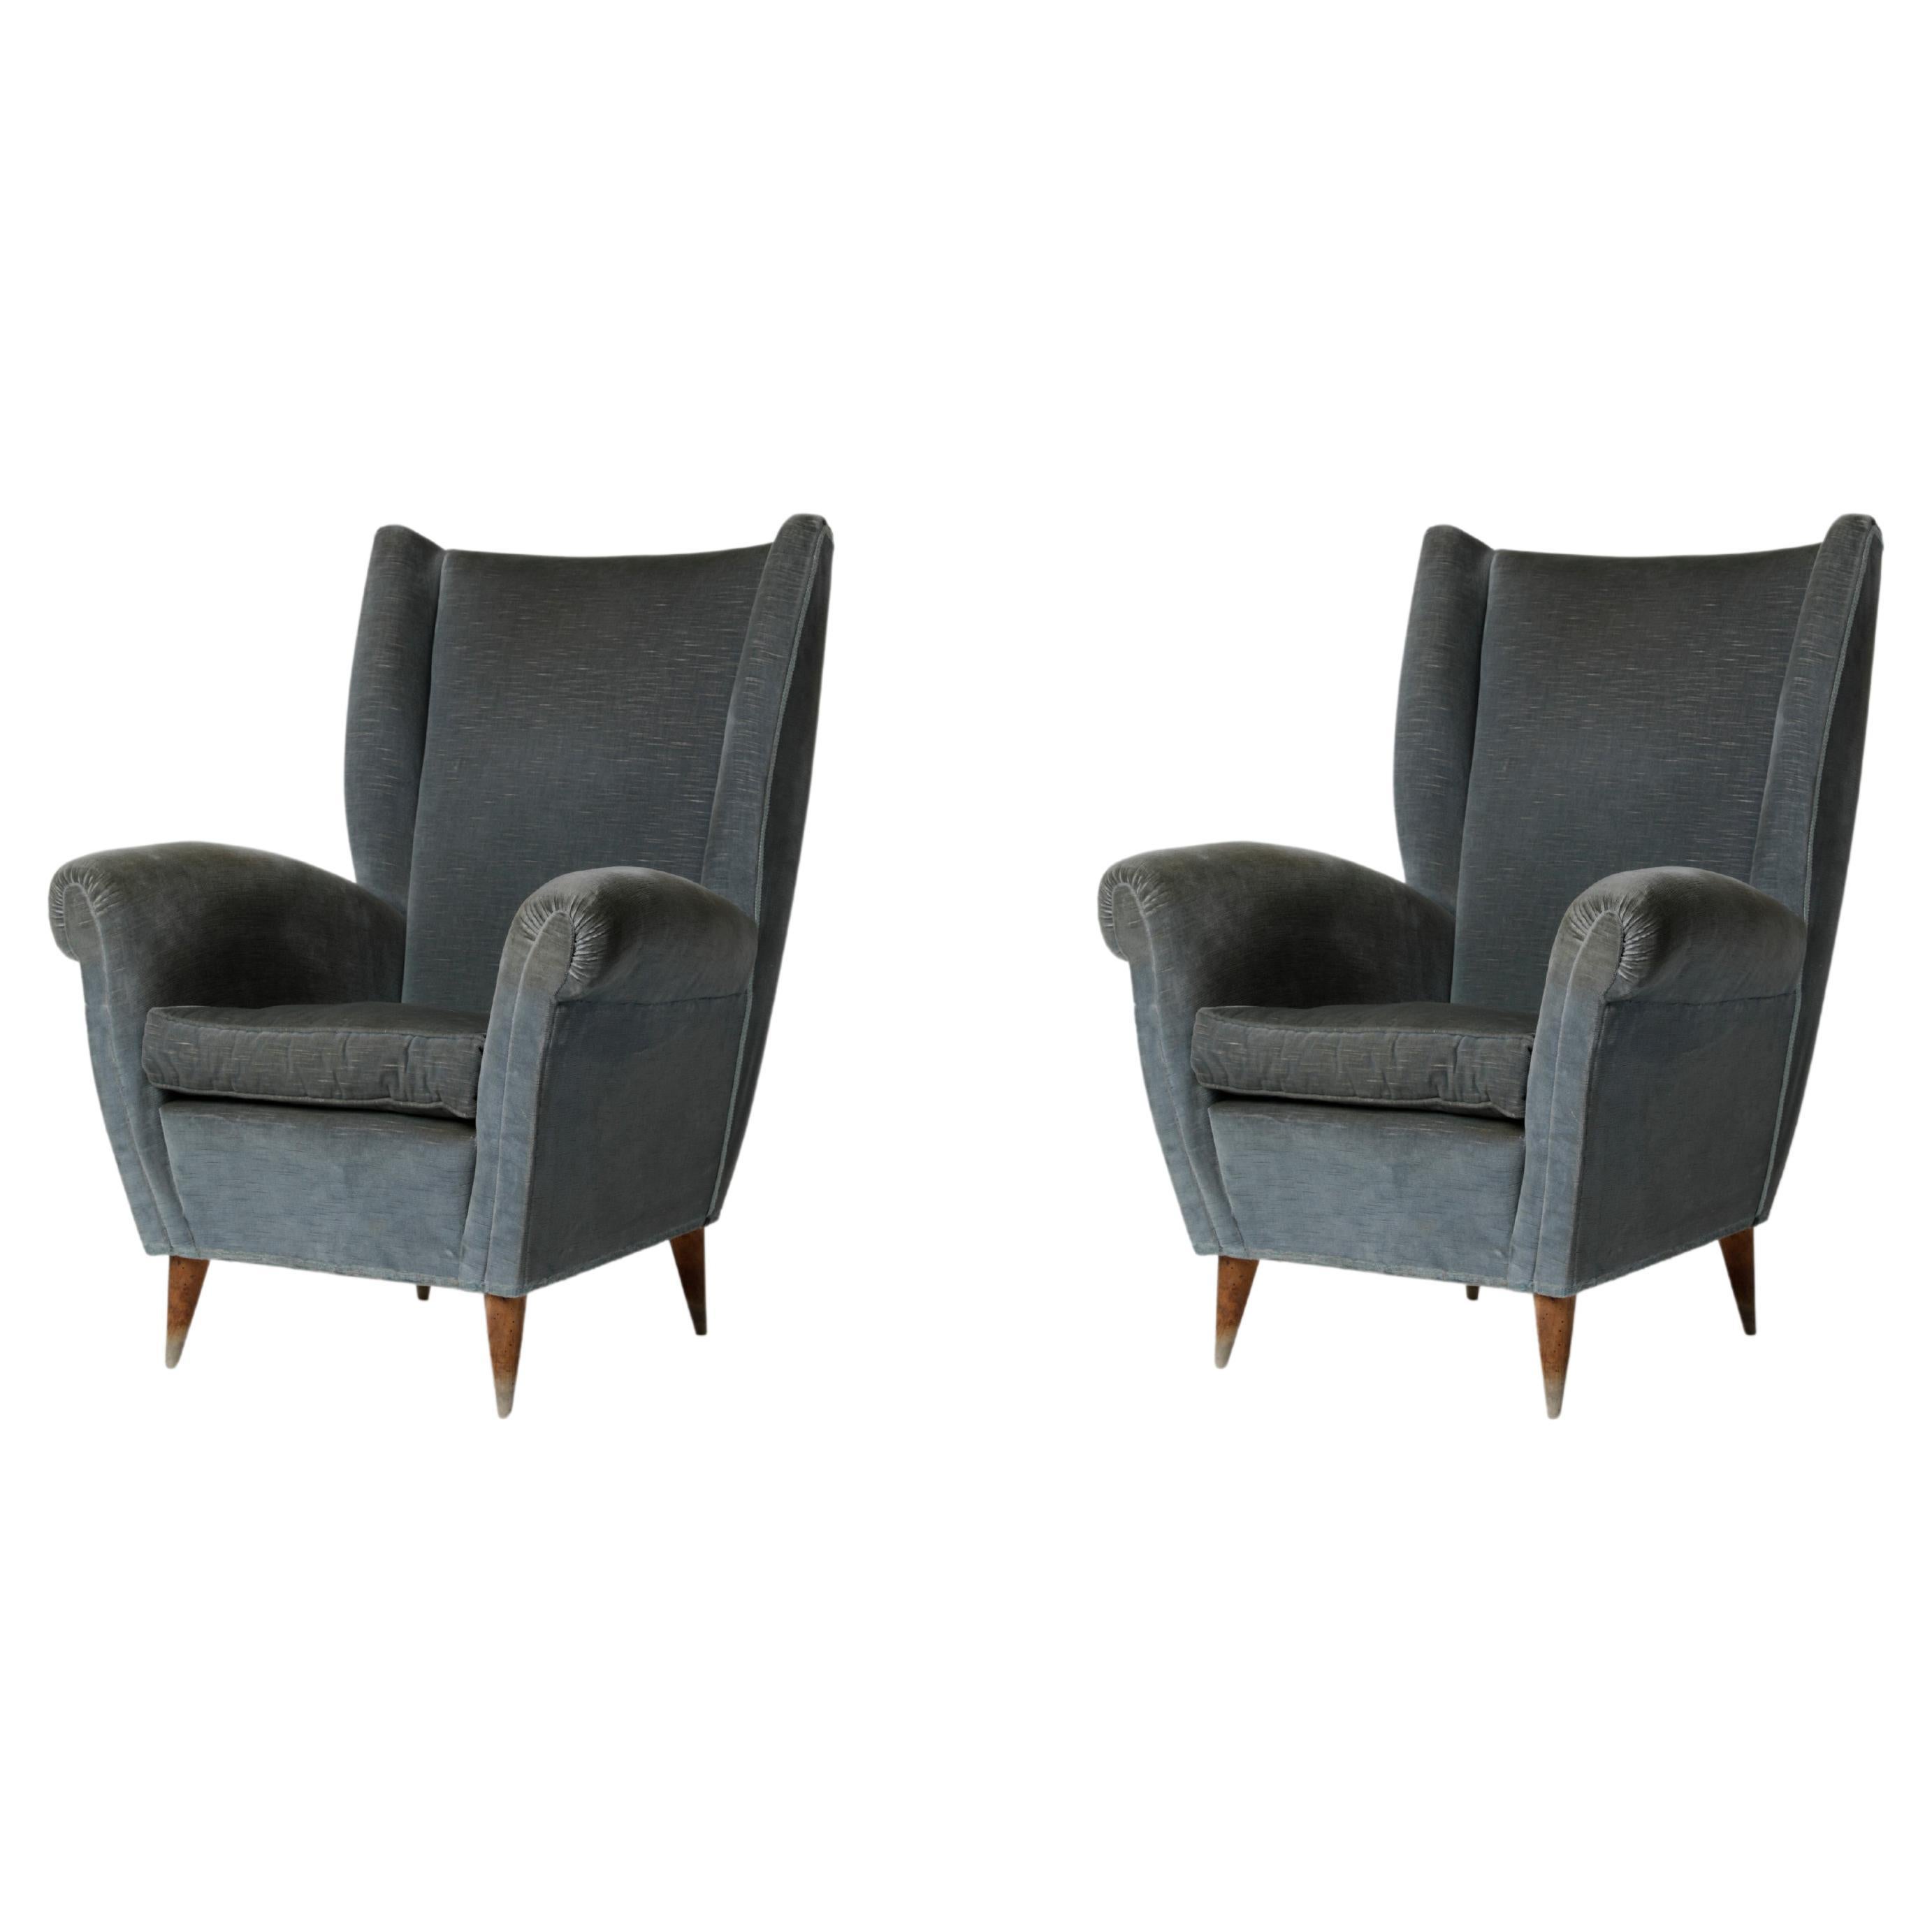 Pair of Italian Mid Century Lounge Chairs by Gio Ponti Attr. for I.S.A. Bergamo